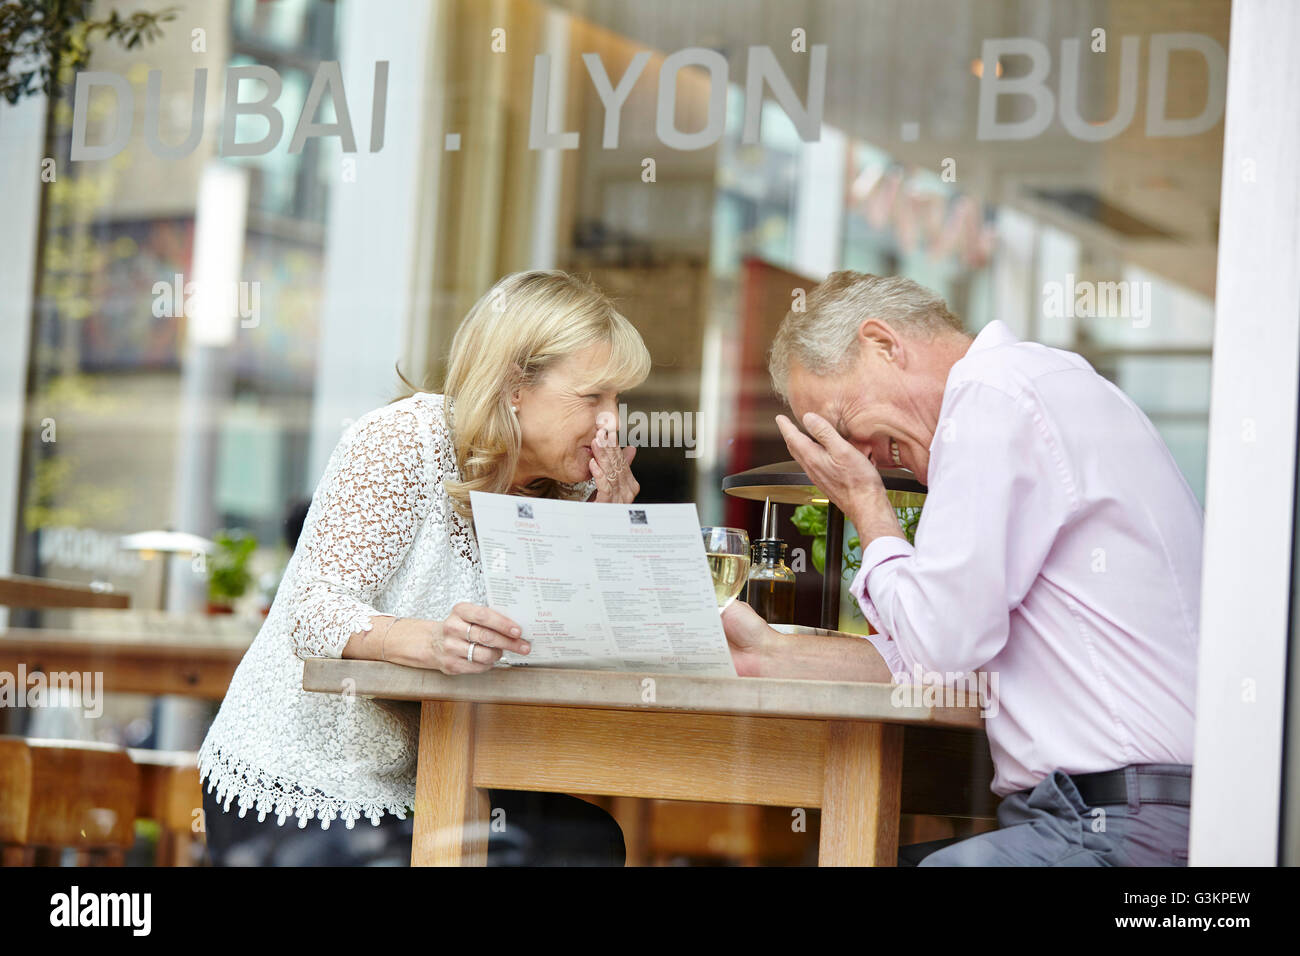 Mature dating couple giggling at restaurant table Stock Photo